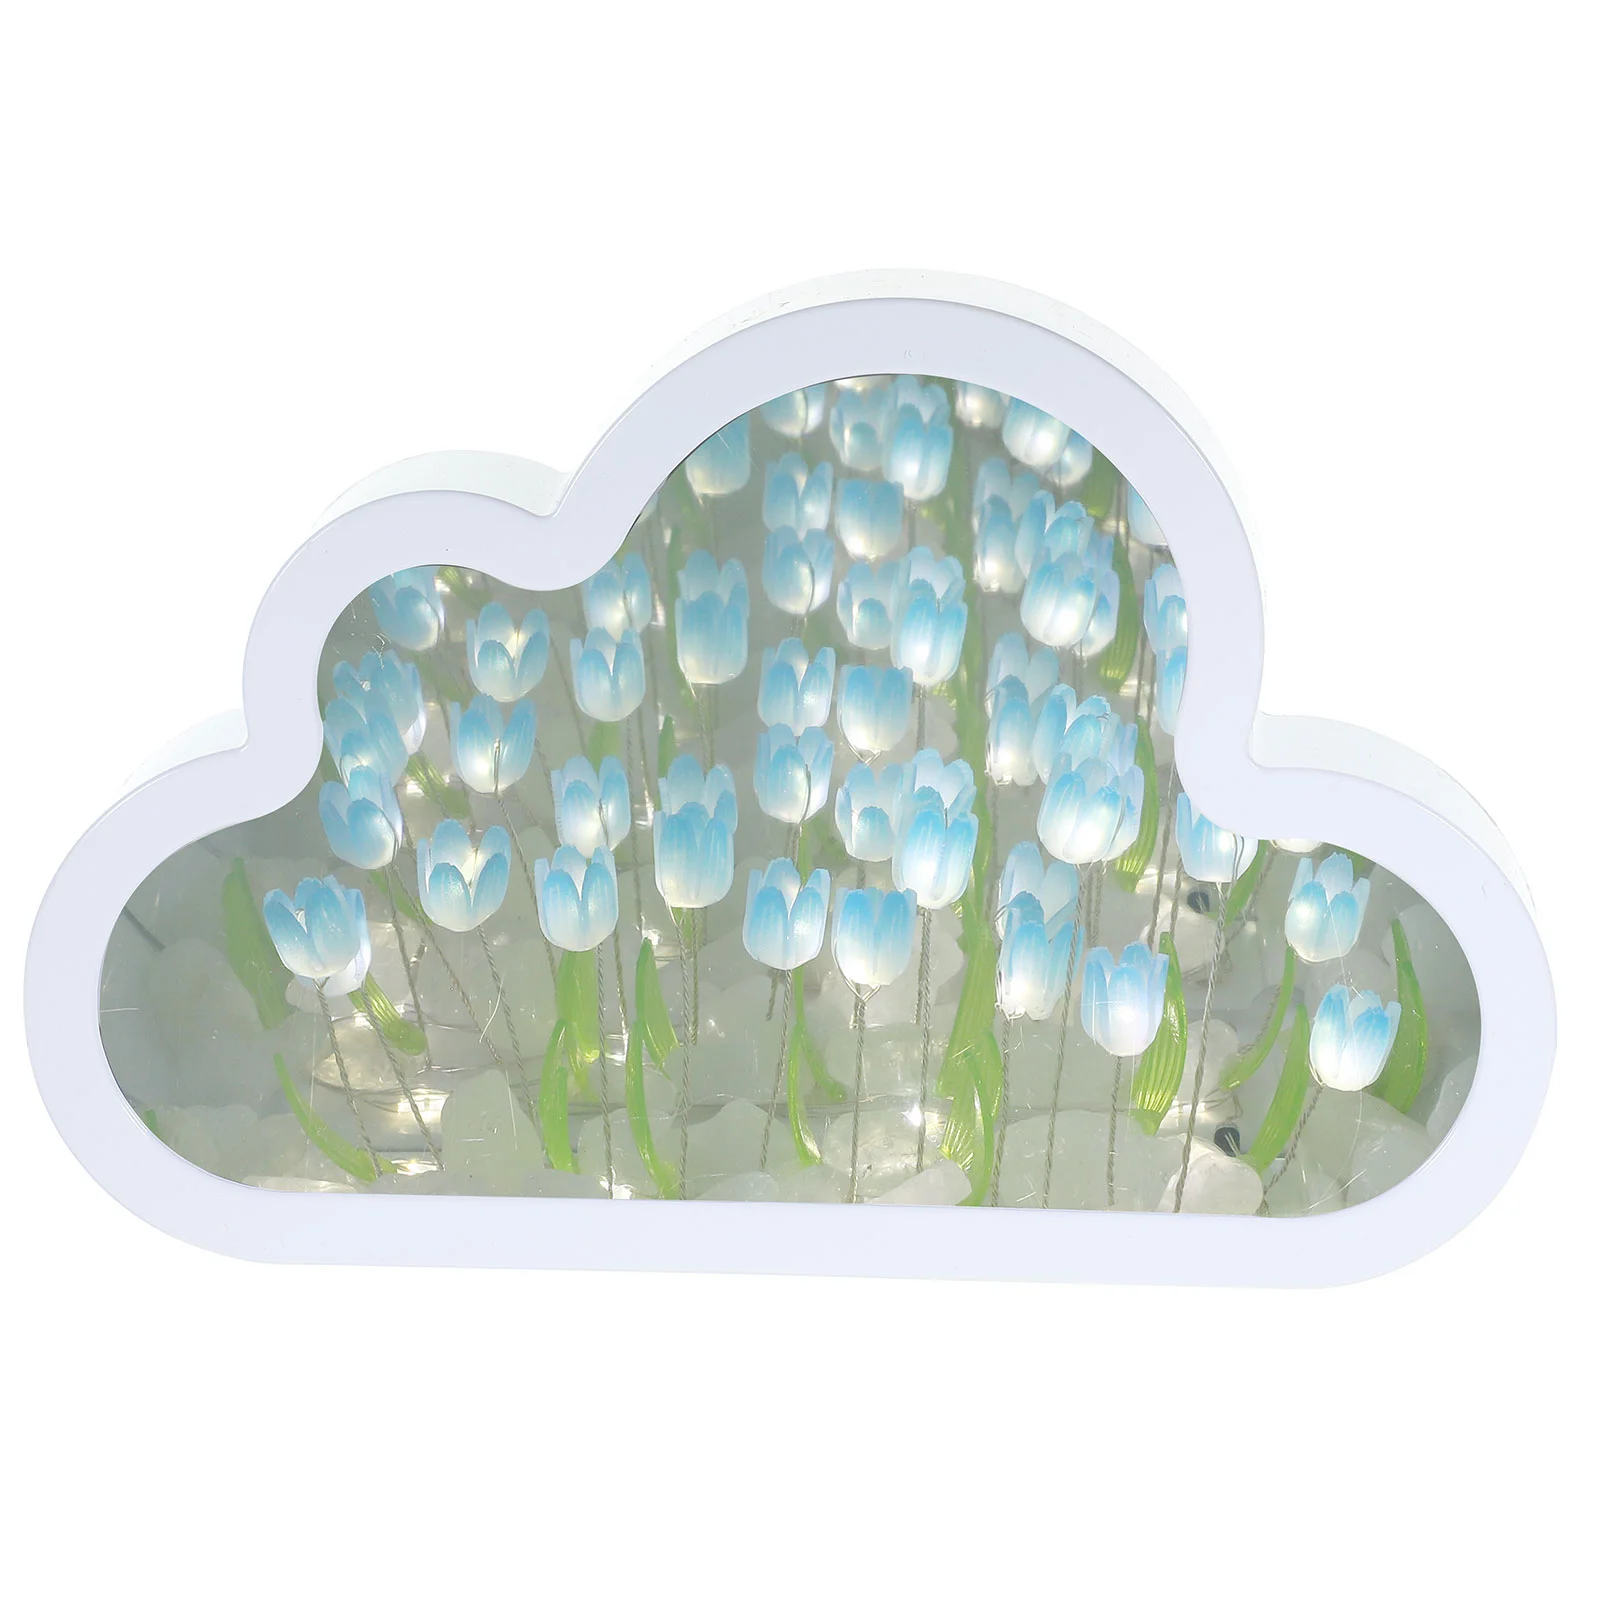 

Night Light Tulip Lamp Cloud with Tulips inside Picture Frames Creative Gifts DIY Decorative Abs Home